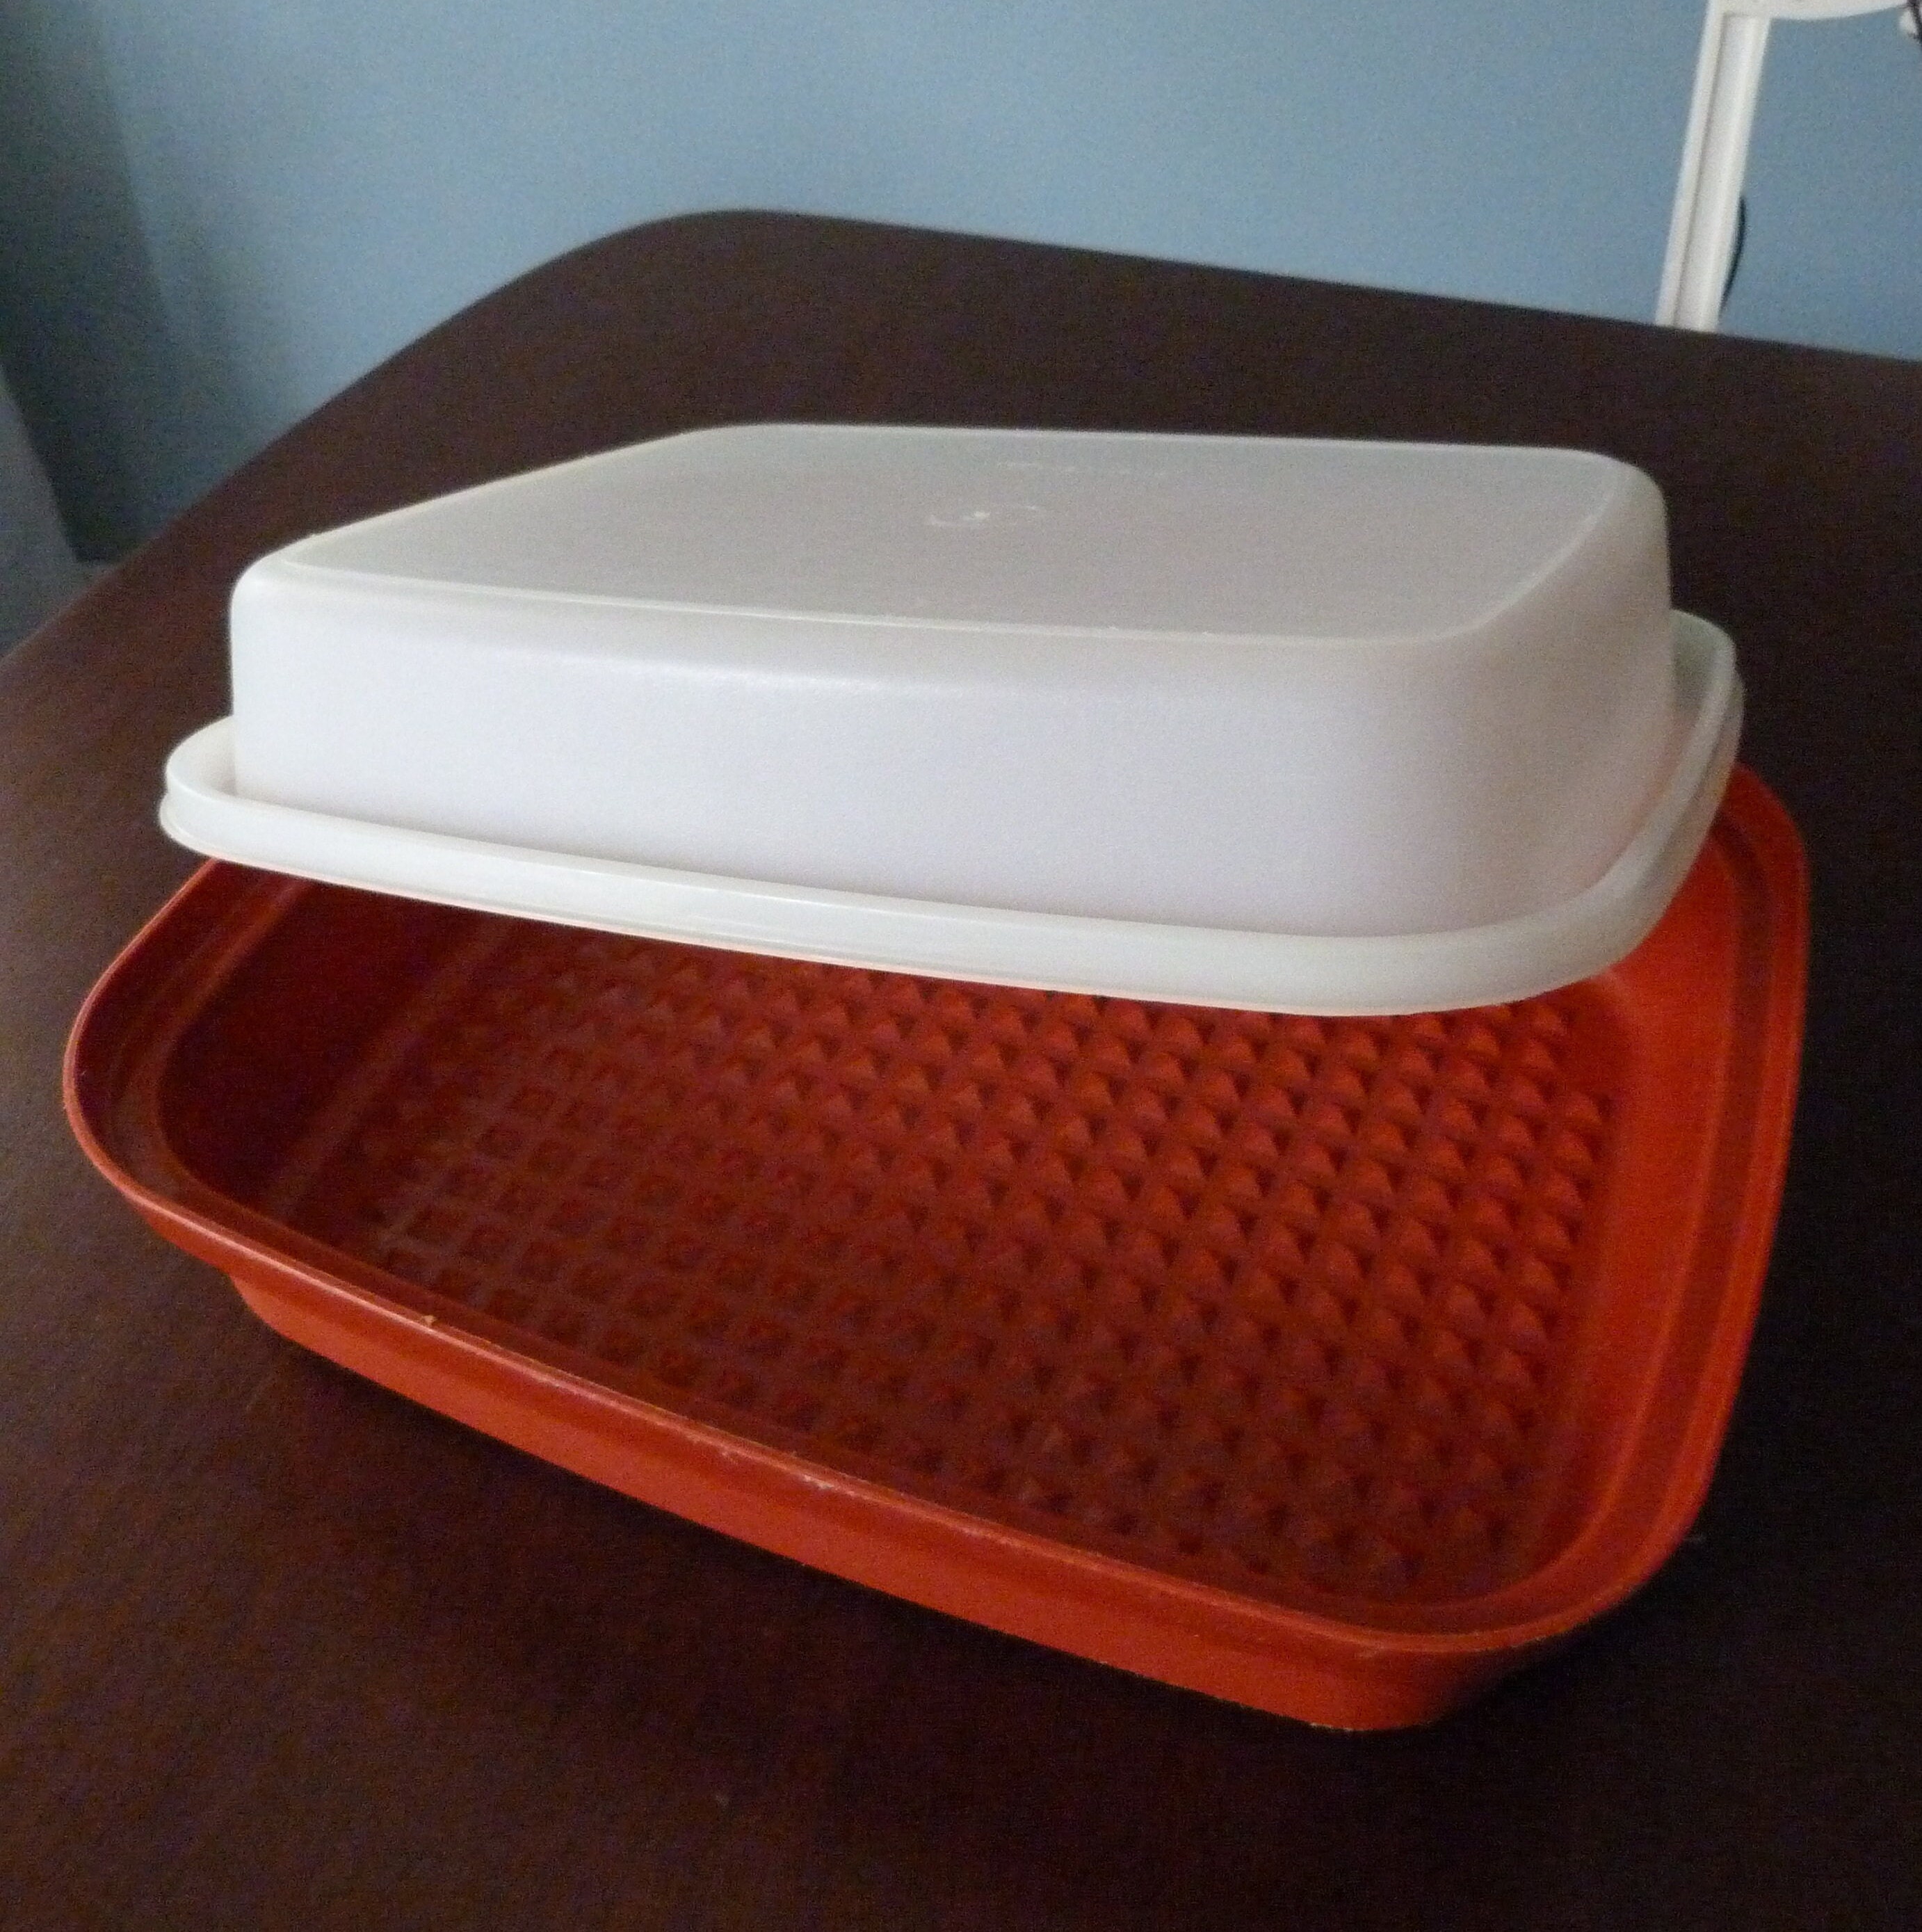 Vintage Tupperware Large Season Serve Marinade Container 1294-6 Paprika  with Lid